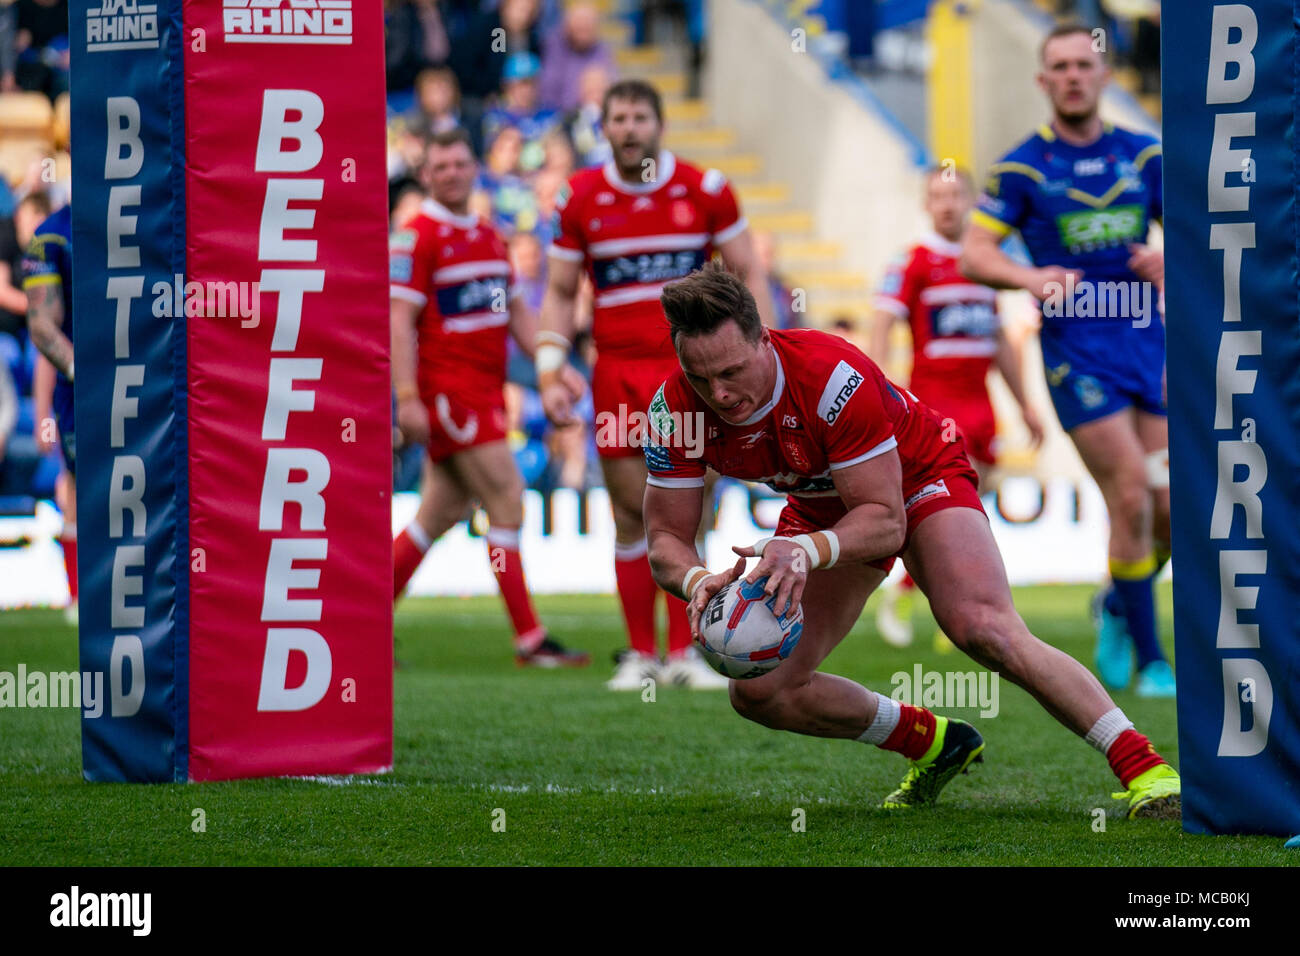 Hulls James Donaldson scores his sides second try   14th April 2018 , The Halliwell Jones Stadium Mike Gregory Way, Warrington, WA2 7NE, England;  Betfred Super League rugby, Round 11, Warrington Wolves v Hull Kingston Rovers Stock Photo